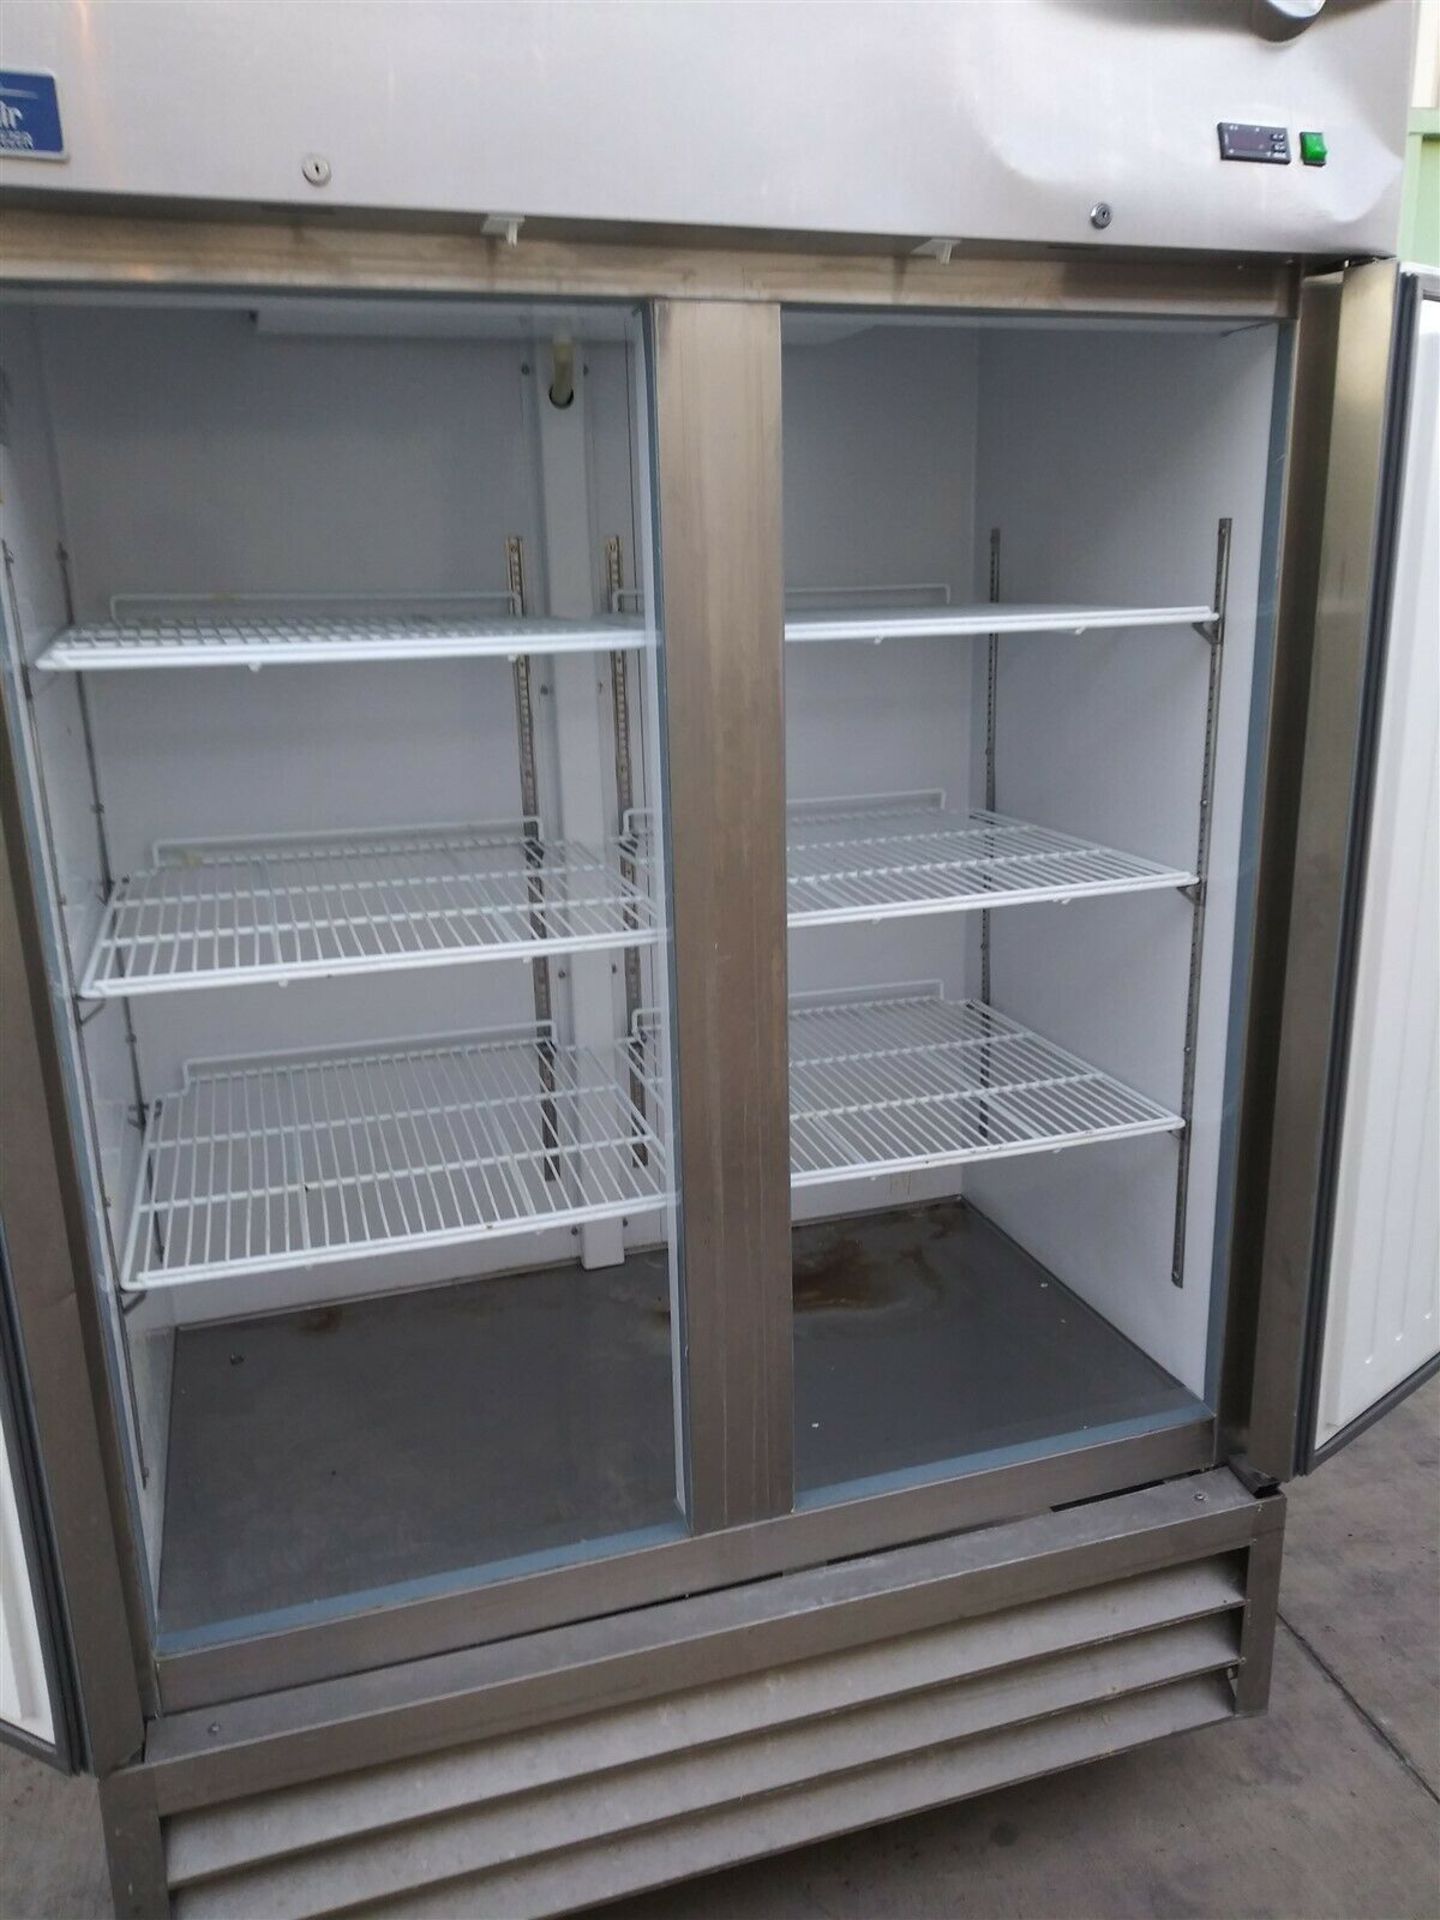 ARCTIC AIR STAINLESS STEEL COMMERCIAL FREEZER - Image 2 of 2